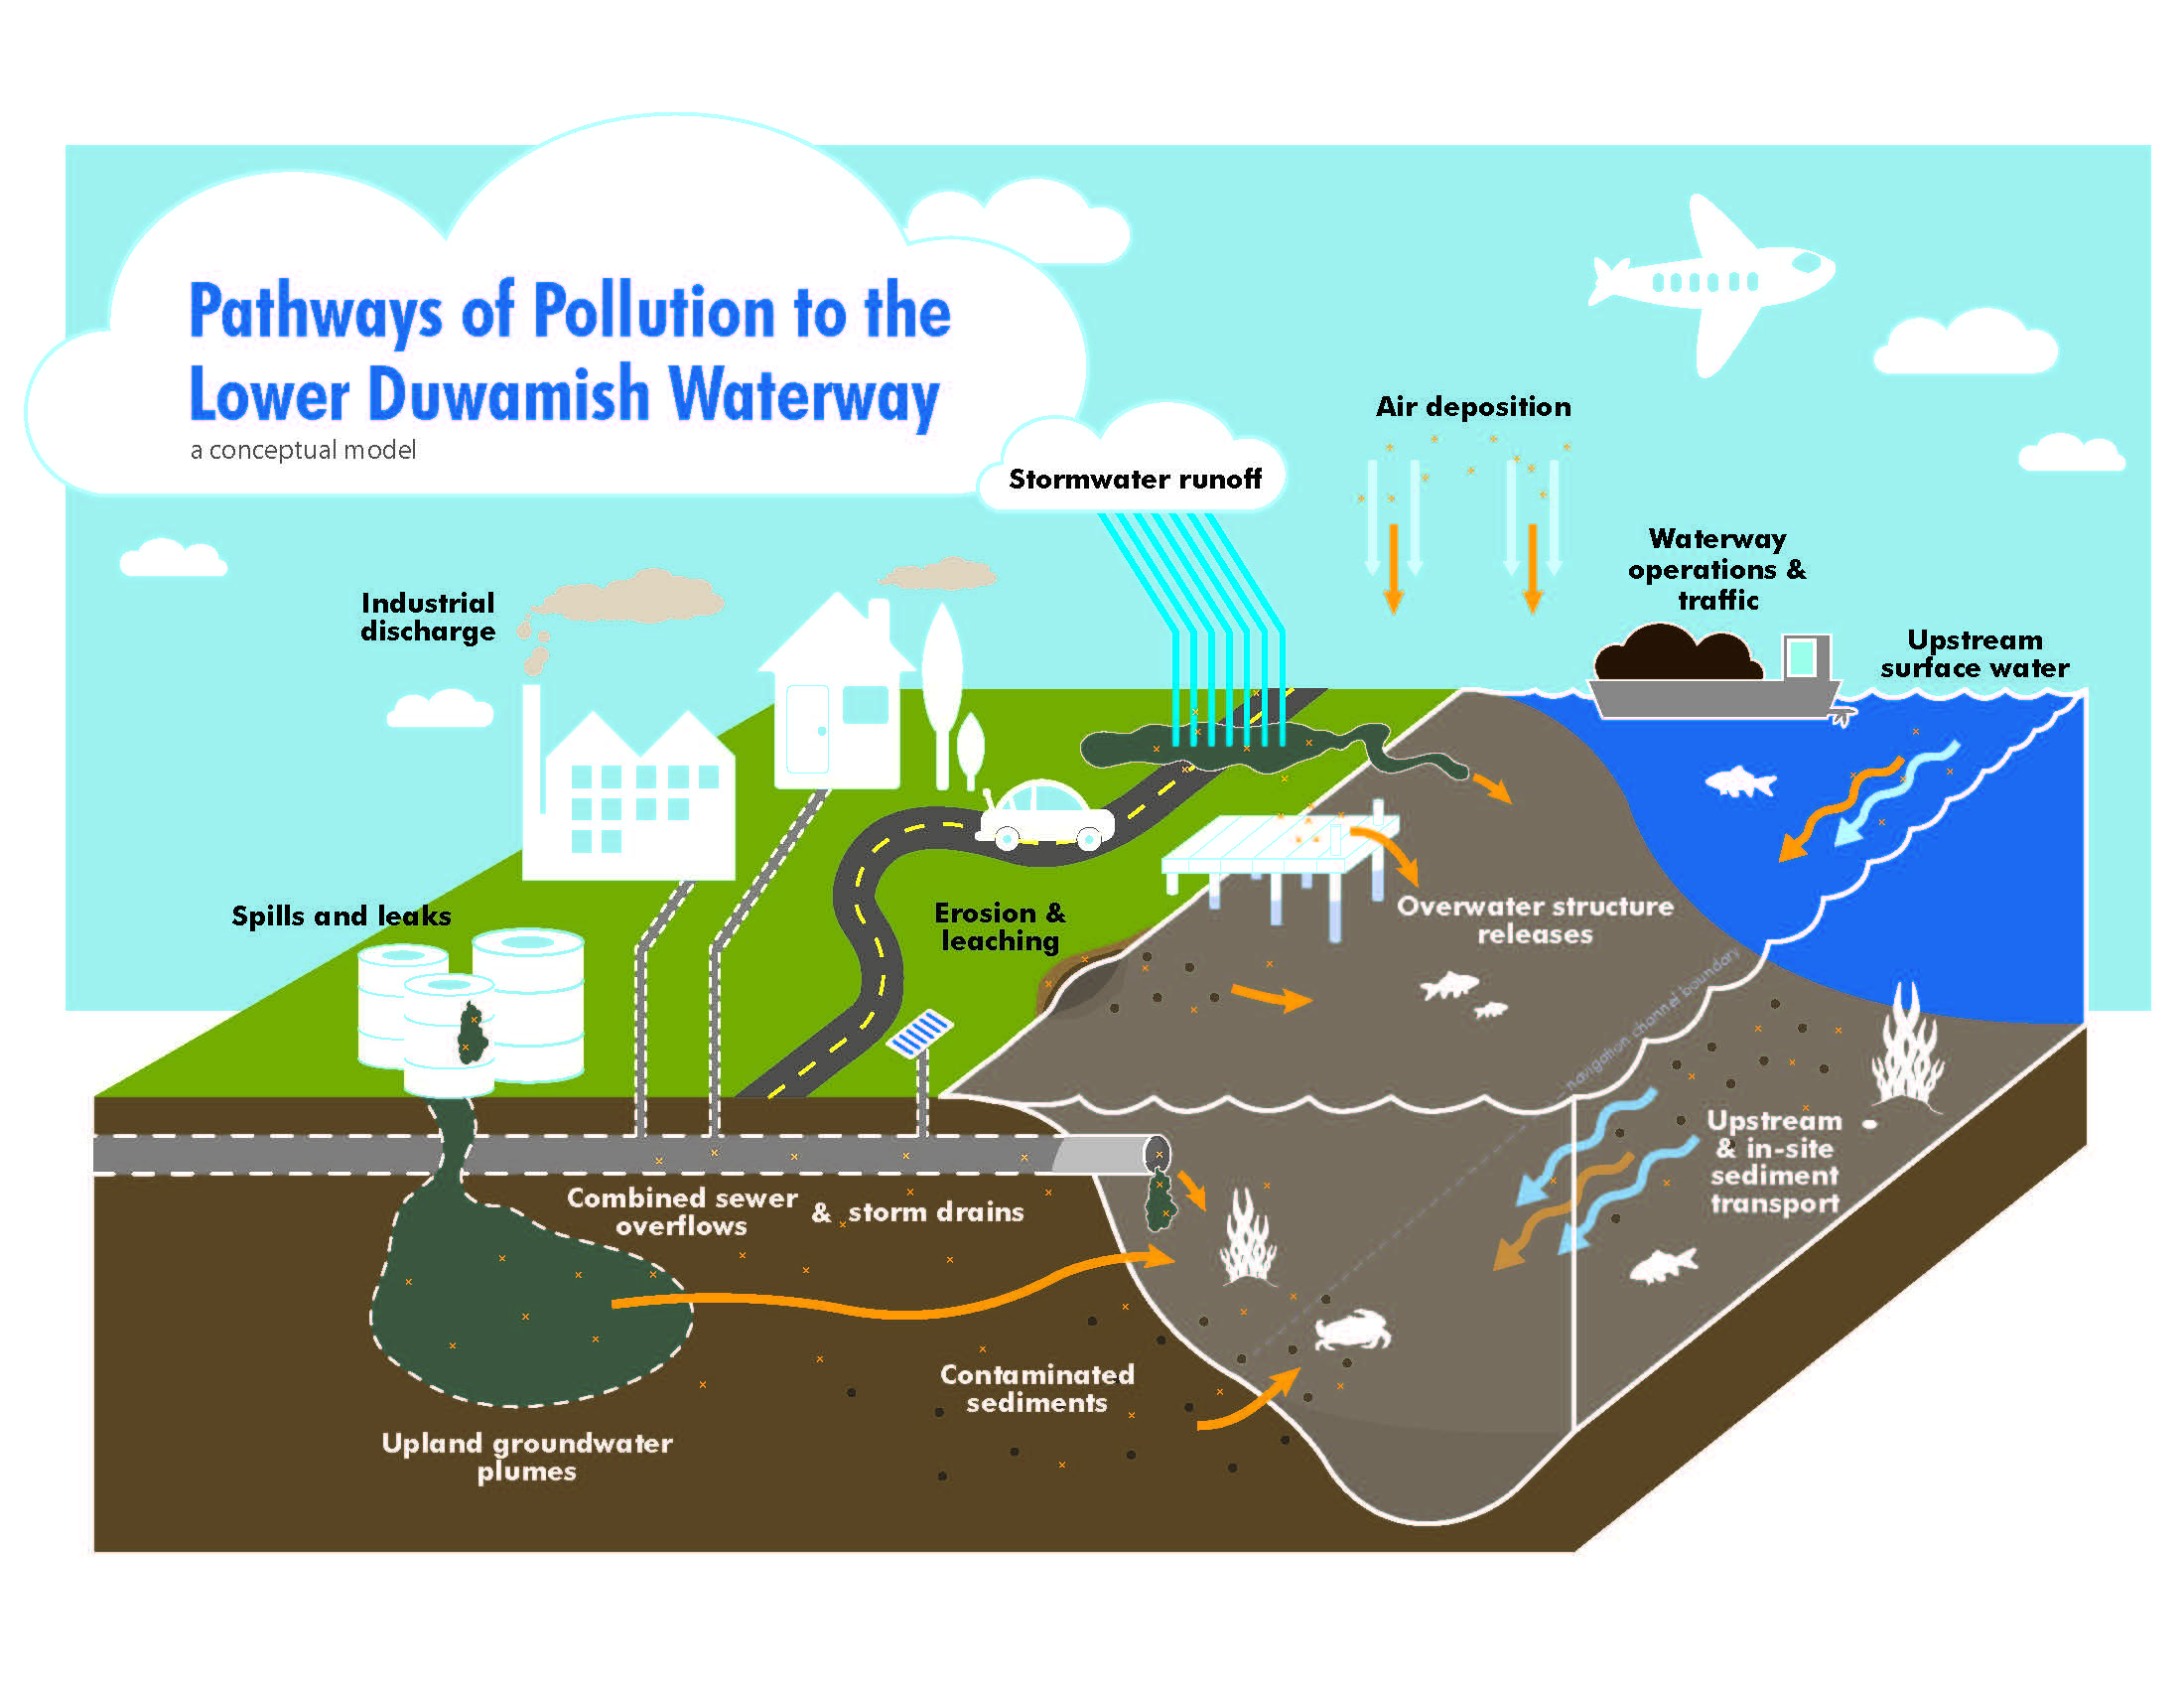 Pollution gets in the river from sewer overflows, storm drains, contaminated or groundwater, spills, leaks, and industrial discharges.